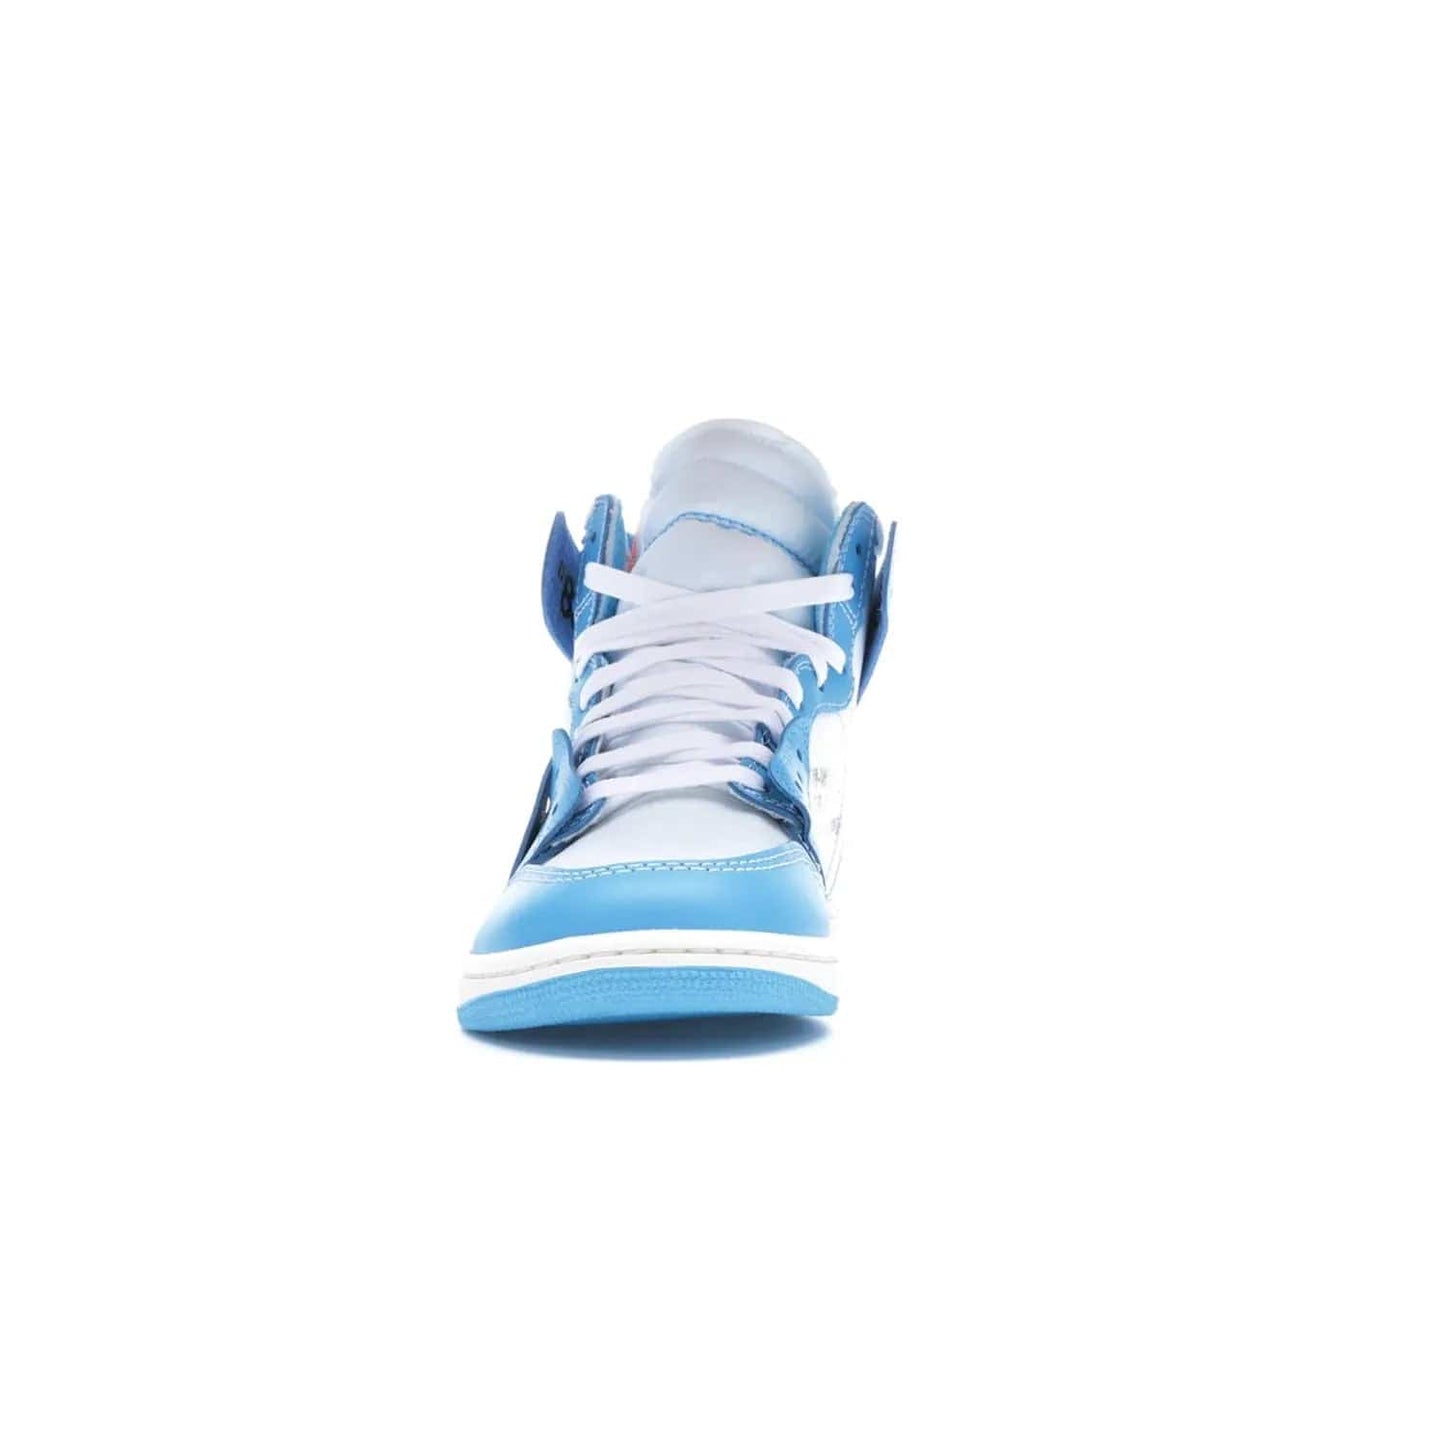 Jordan 1 Retro High Off-White University Blue - Image 11 - Only at www.BallersClubKickz.com - Classic Jordan 1 Retro High "Off-White UNC" sneakers meld style and comfort. Boasting deconstructed white and blue leather, Off-White detailing, and a white, dark powder blue and cone colorway, these sneakers are perfect for dressing up or down. Get the iconic Off-White Jordan 1's and upgrade your look.